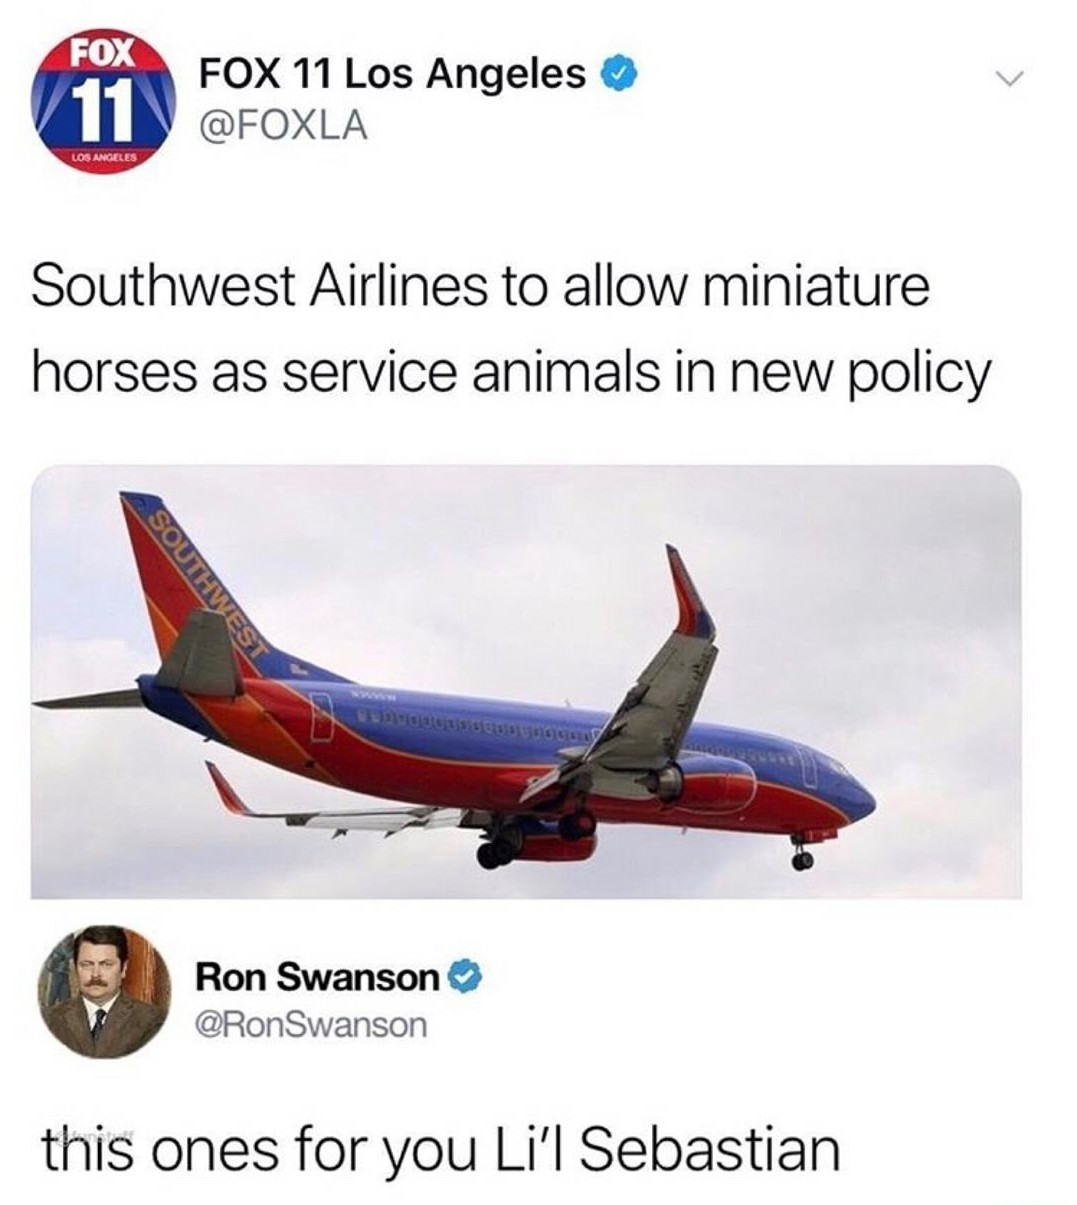 southwest airlines to allow miniature horses - Fox Fox 11 Los Angeles Southwest Airlines to allow miniature horses as service animals in new policy Southwest Ron Swanson Swanson this ones for you Li'l Sebastian